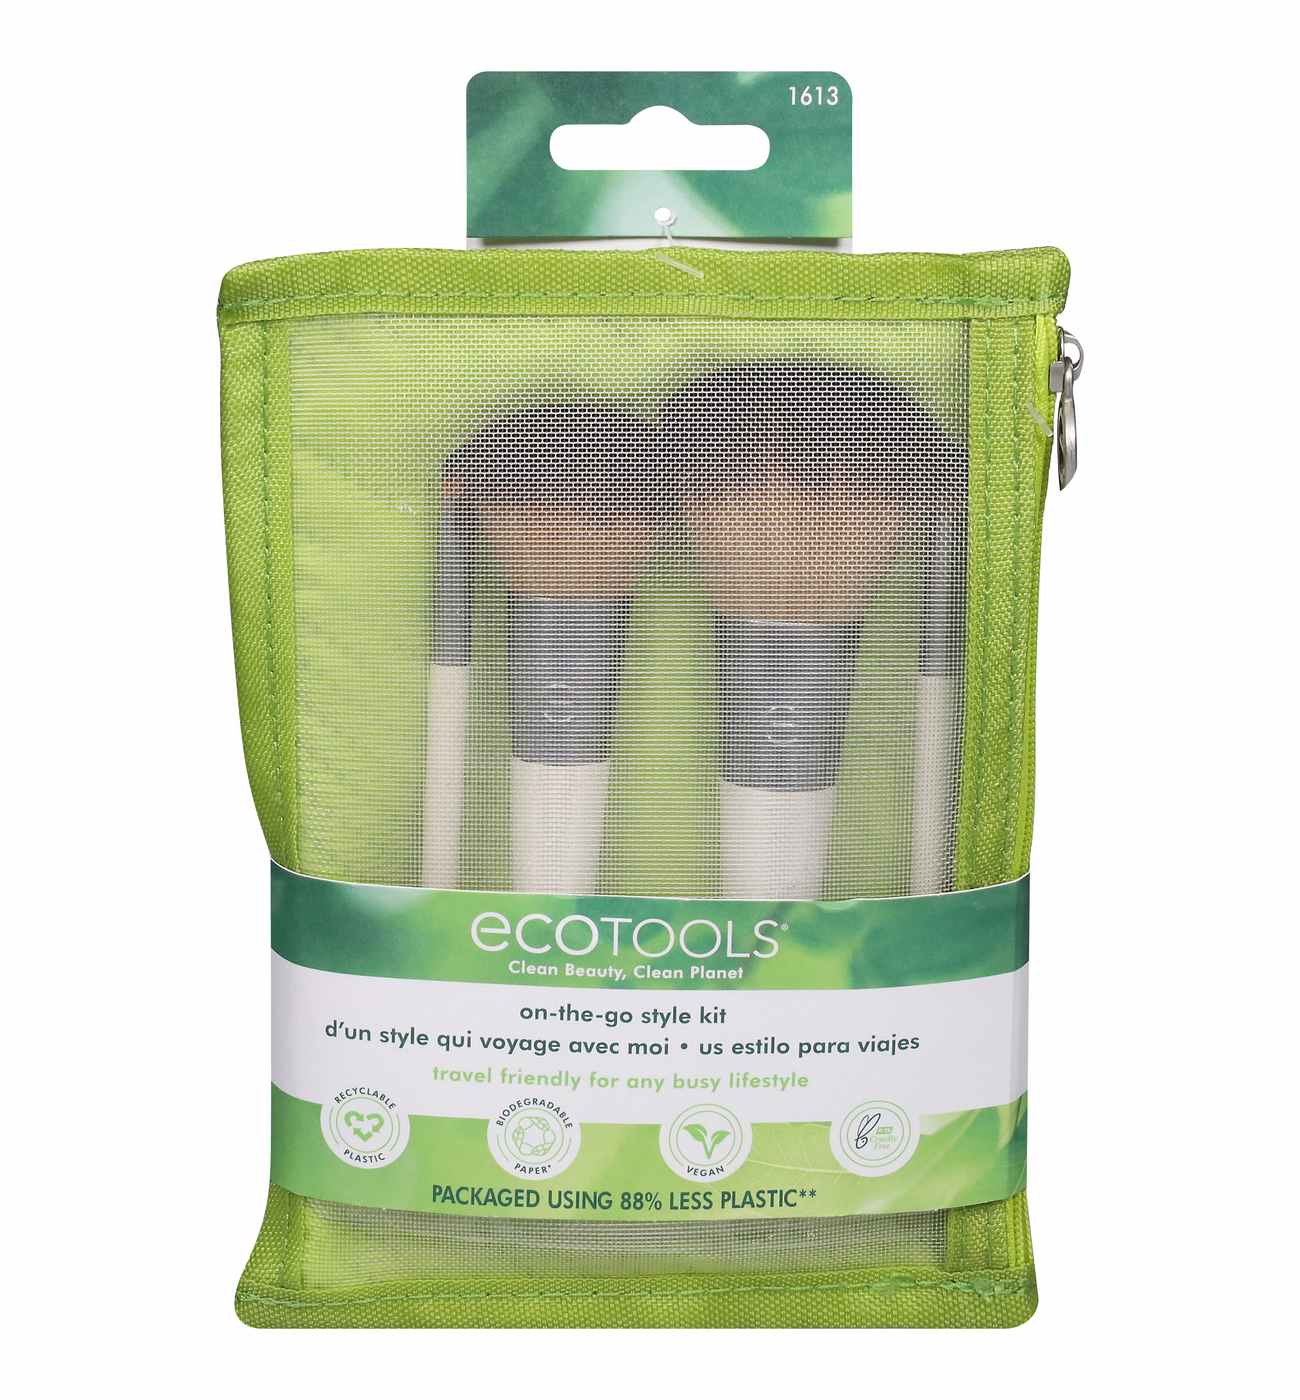 EcoTools On The Go Style Kit; image 6 of 7